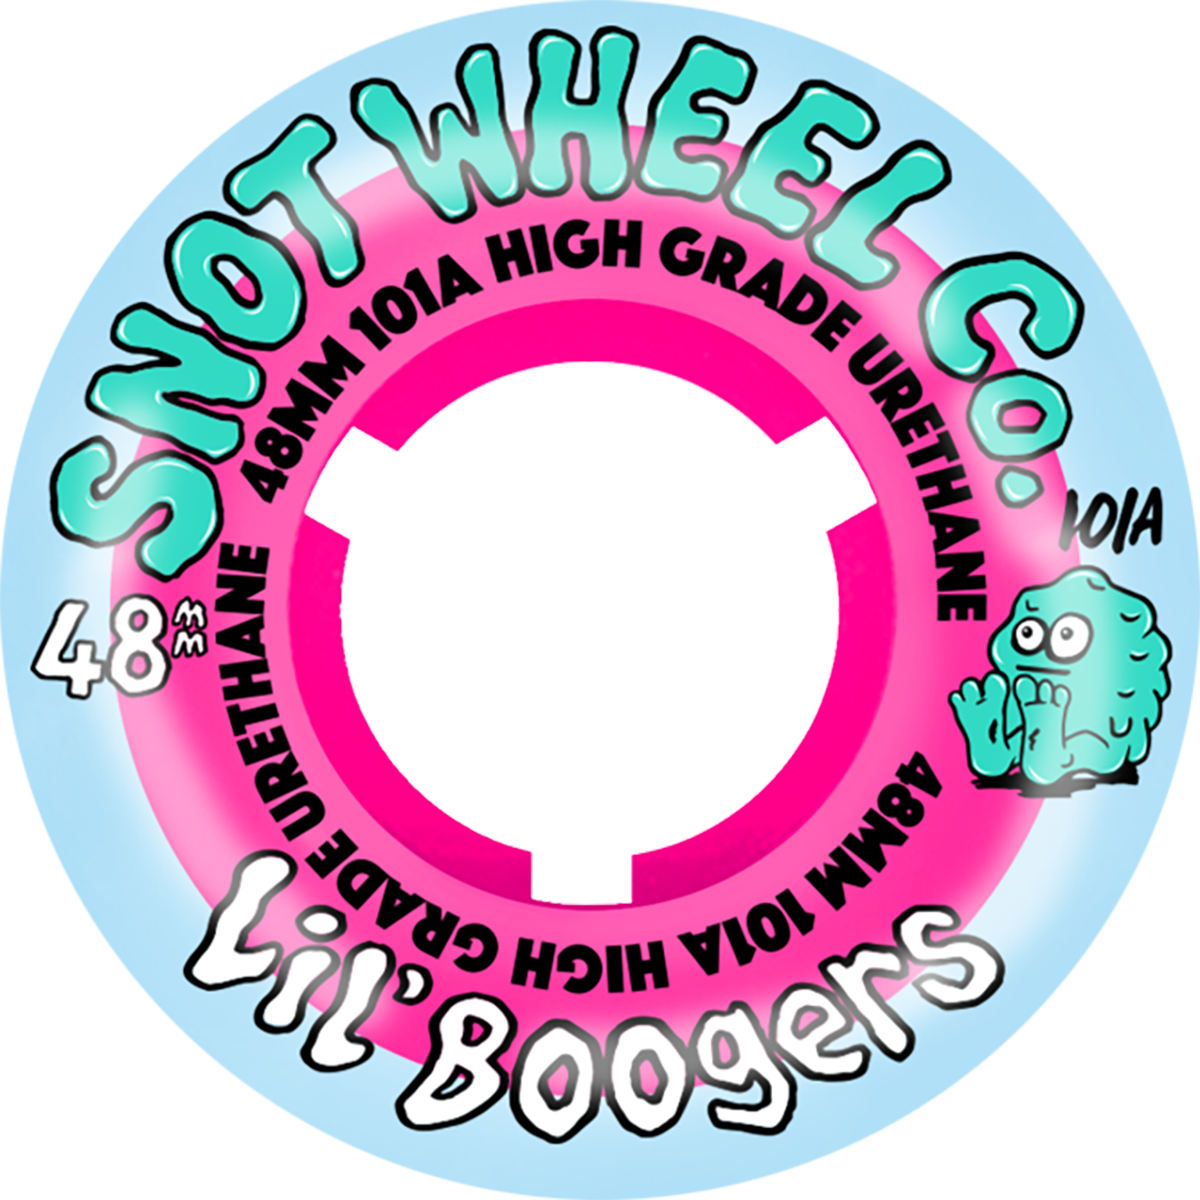 Snot Lil Boogers Skateboard Wheels 48MM 101A Ice Blue/Pink - Invisible Board Shop